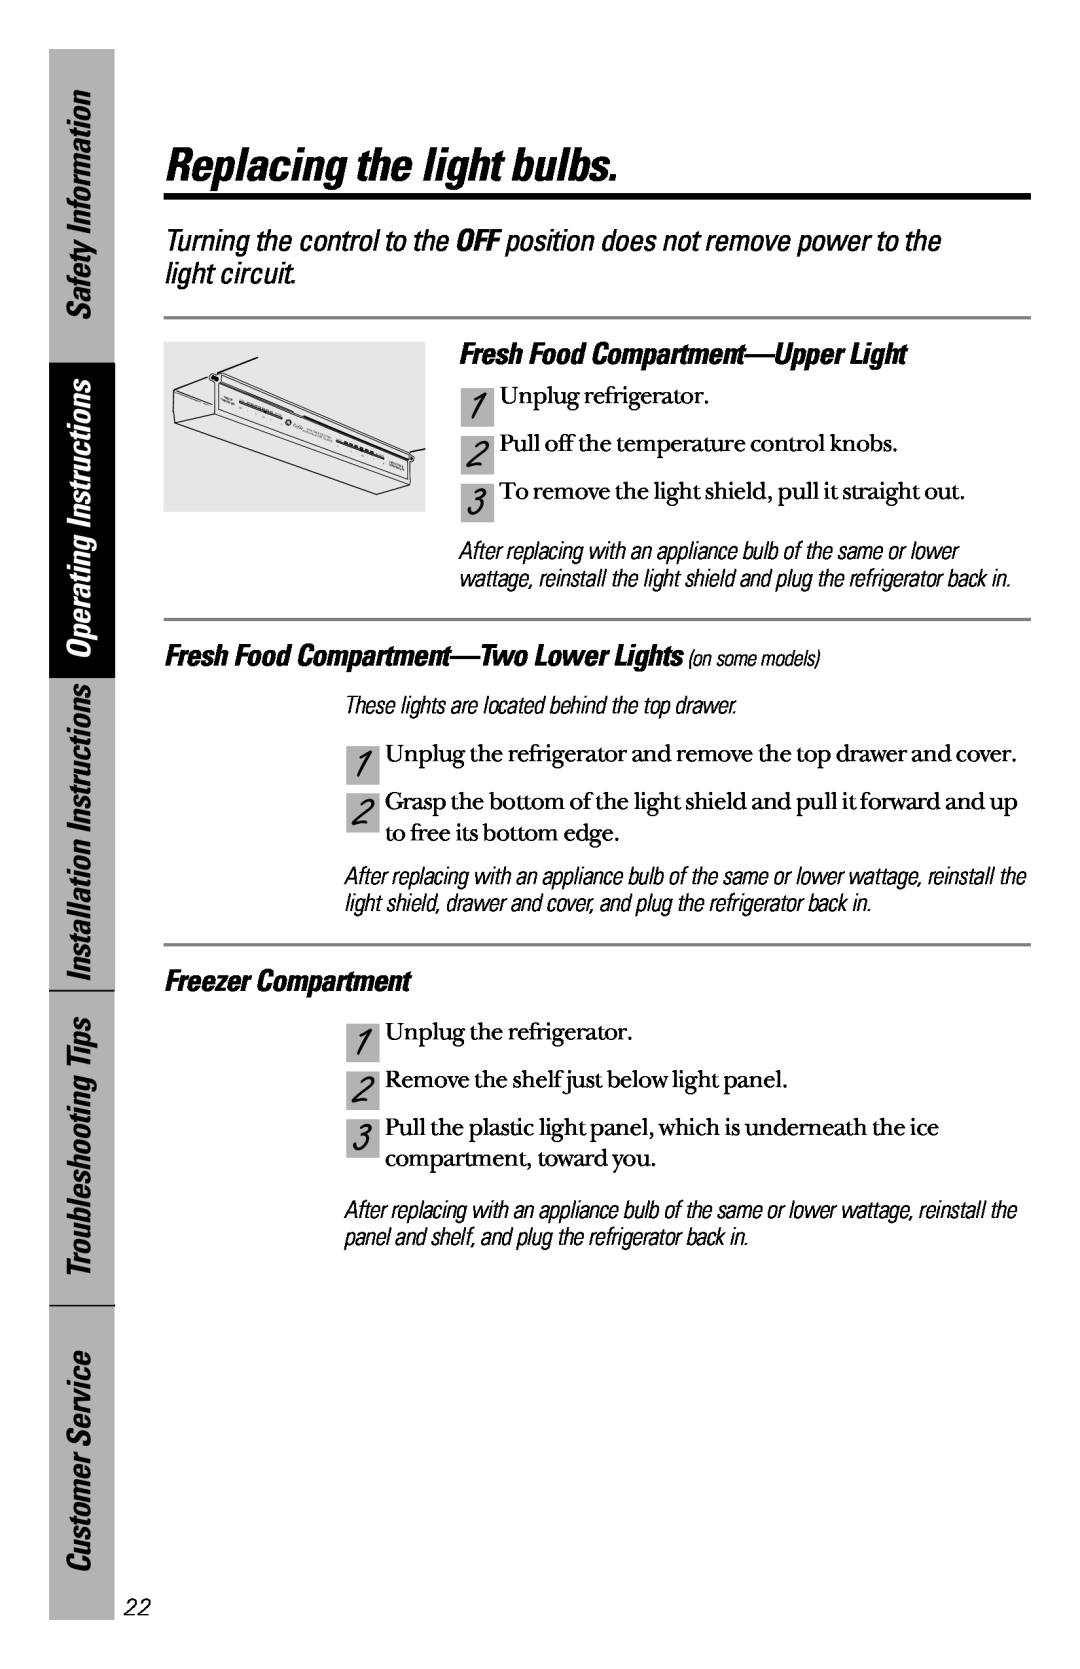 GE 28, 30 Replacing the light bulbs, Fresh Food Compartment-Upper Light, Freezer Compartment, Safety Information 